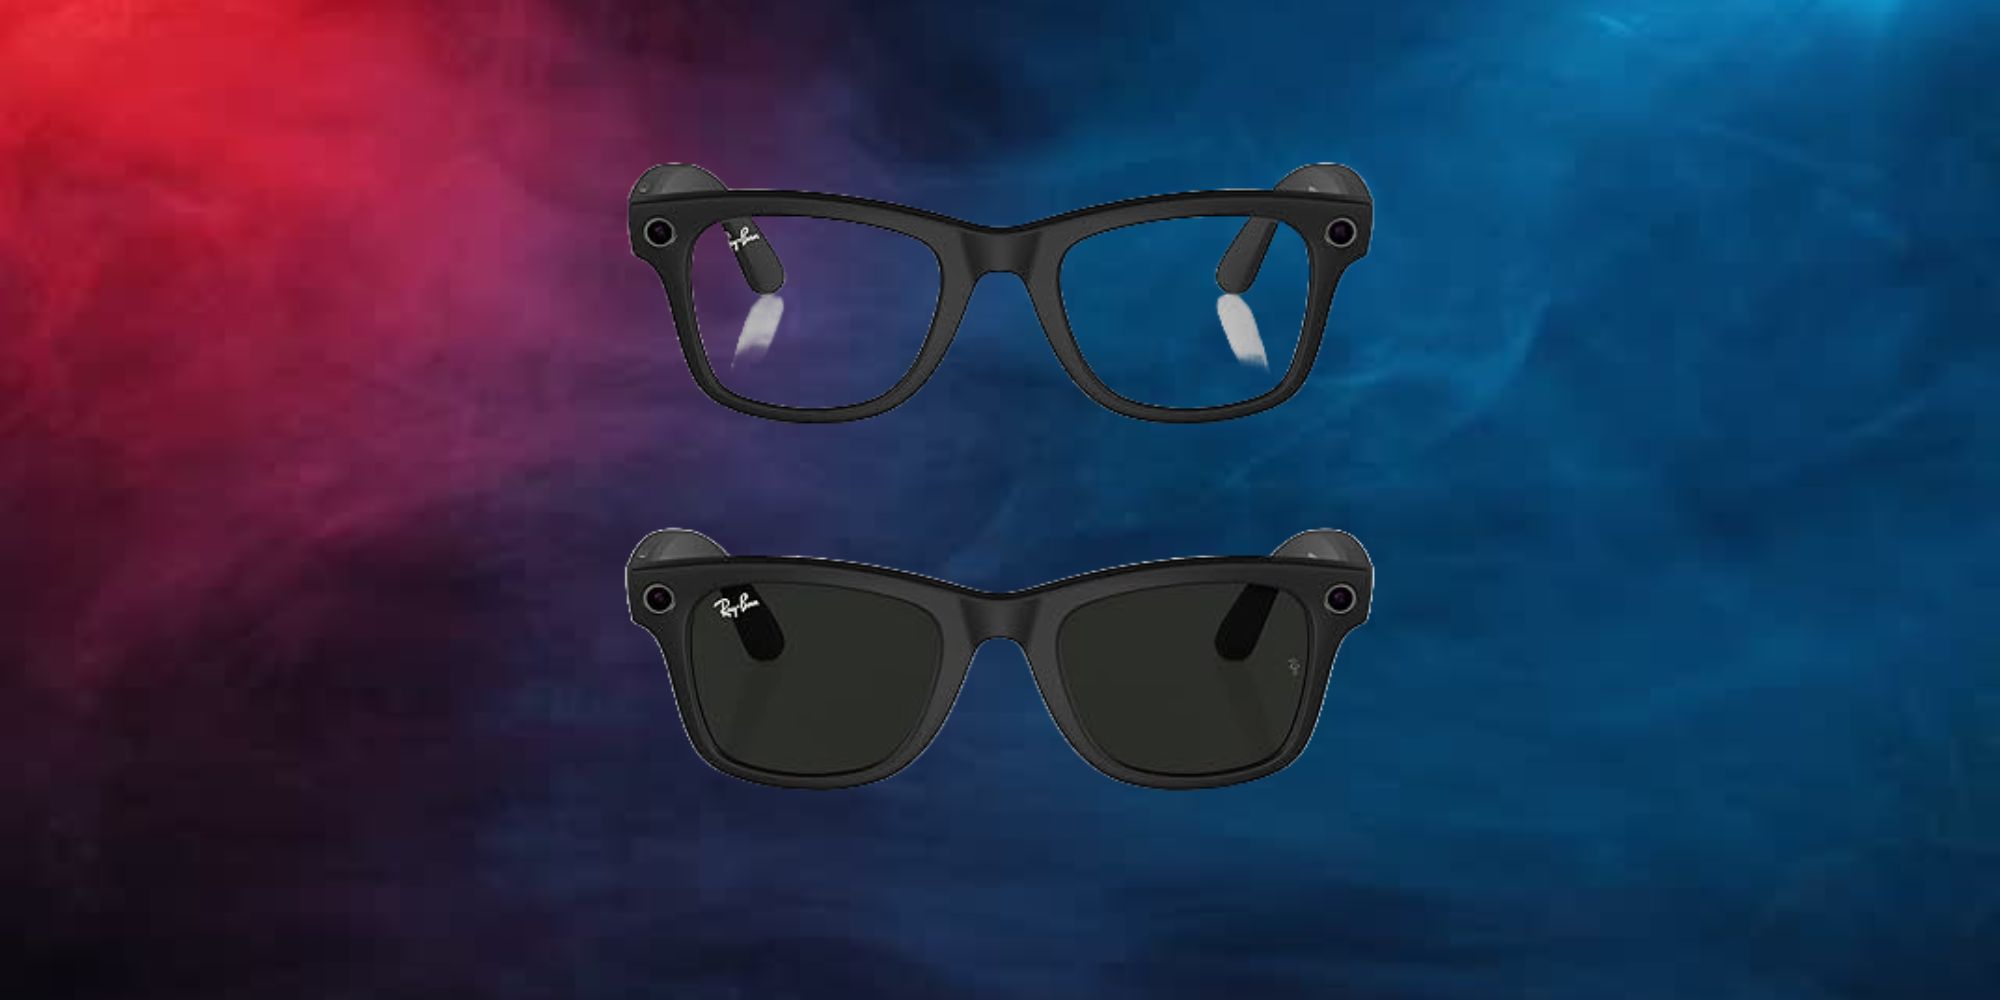 Meta Smart Glasses on a red and blue background